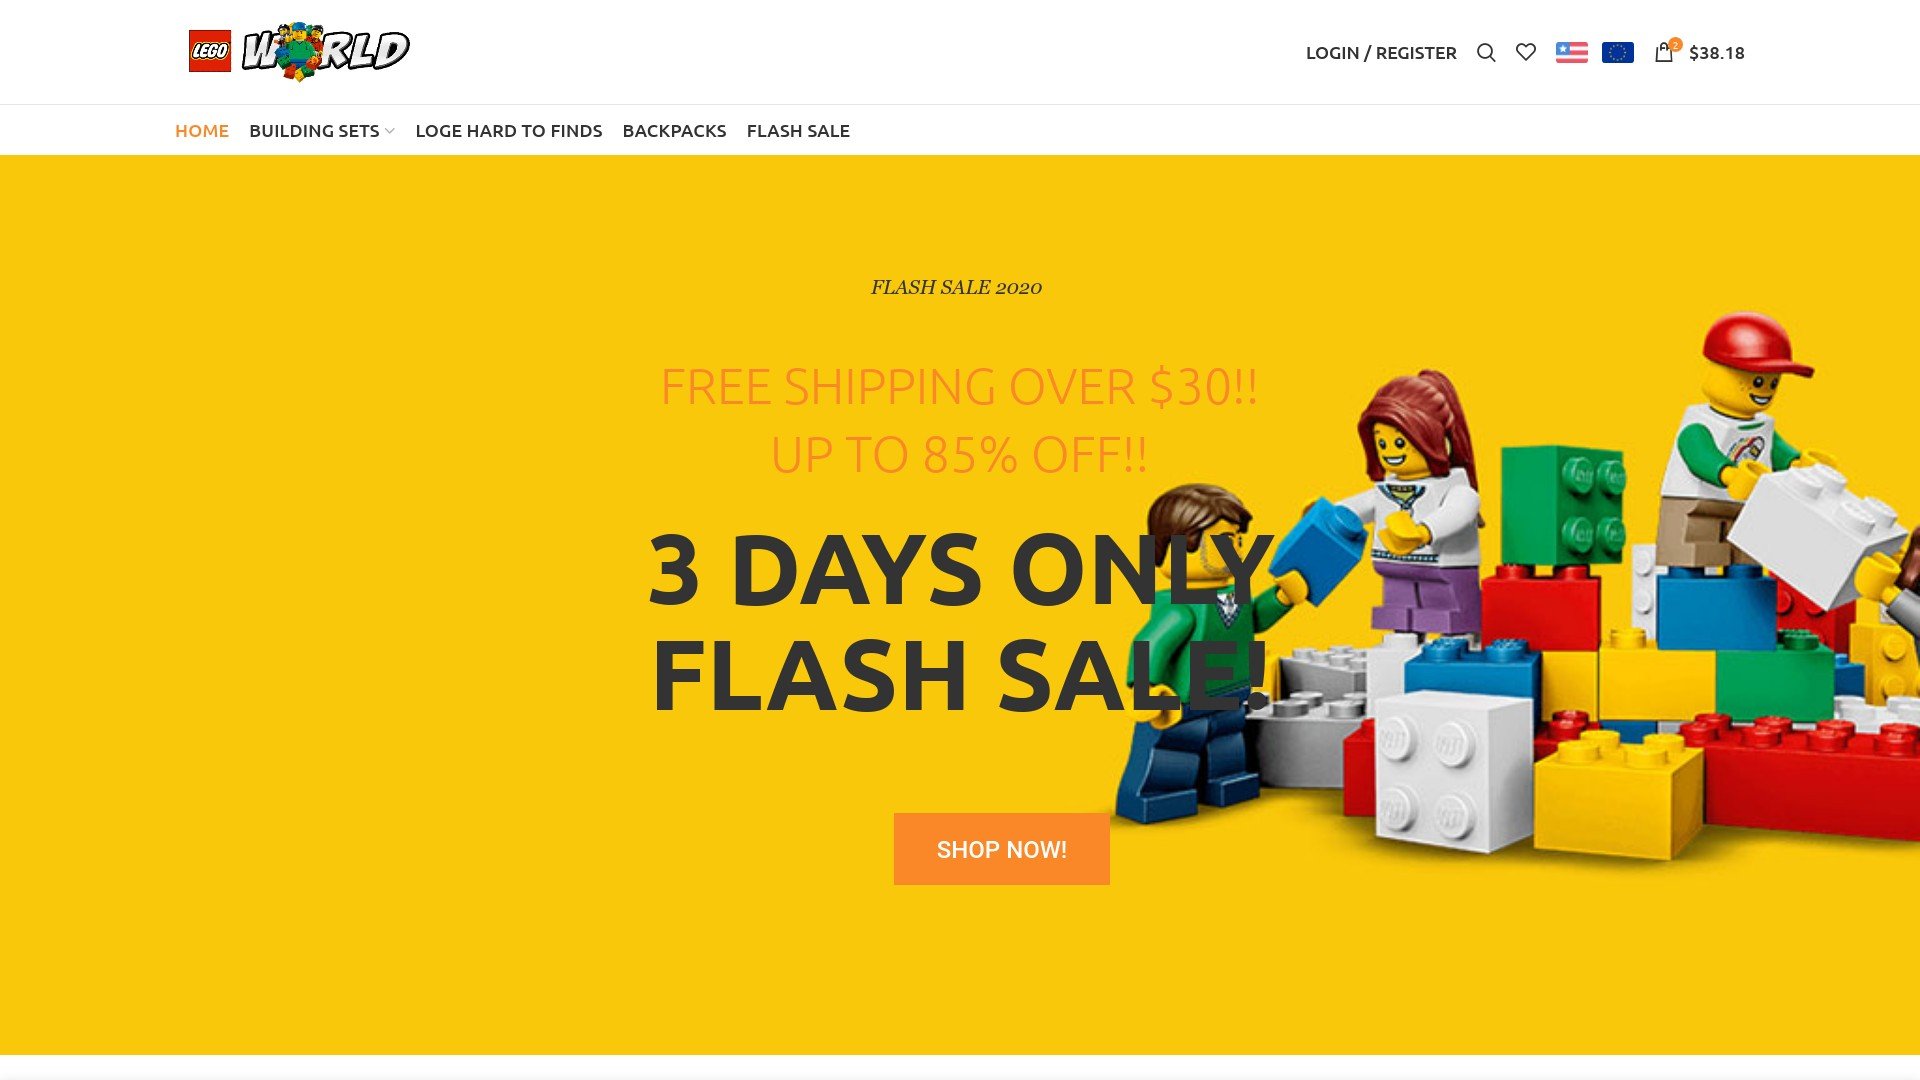 Is Lego Mall Shop a Scam? See the Review of the Online Store